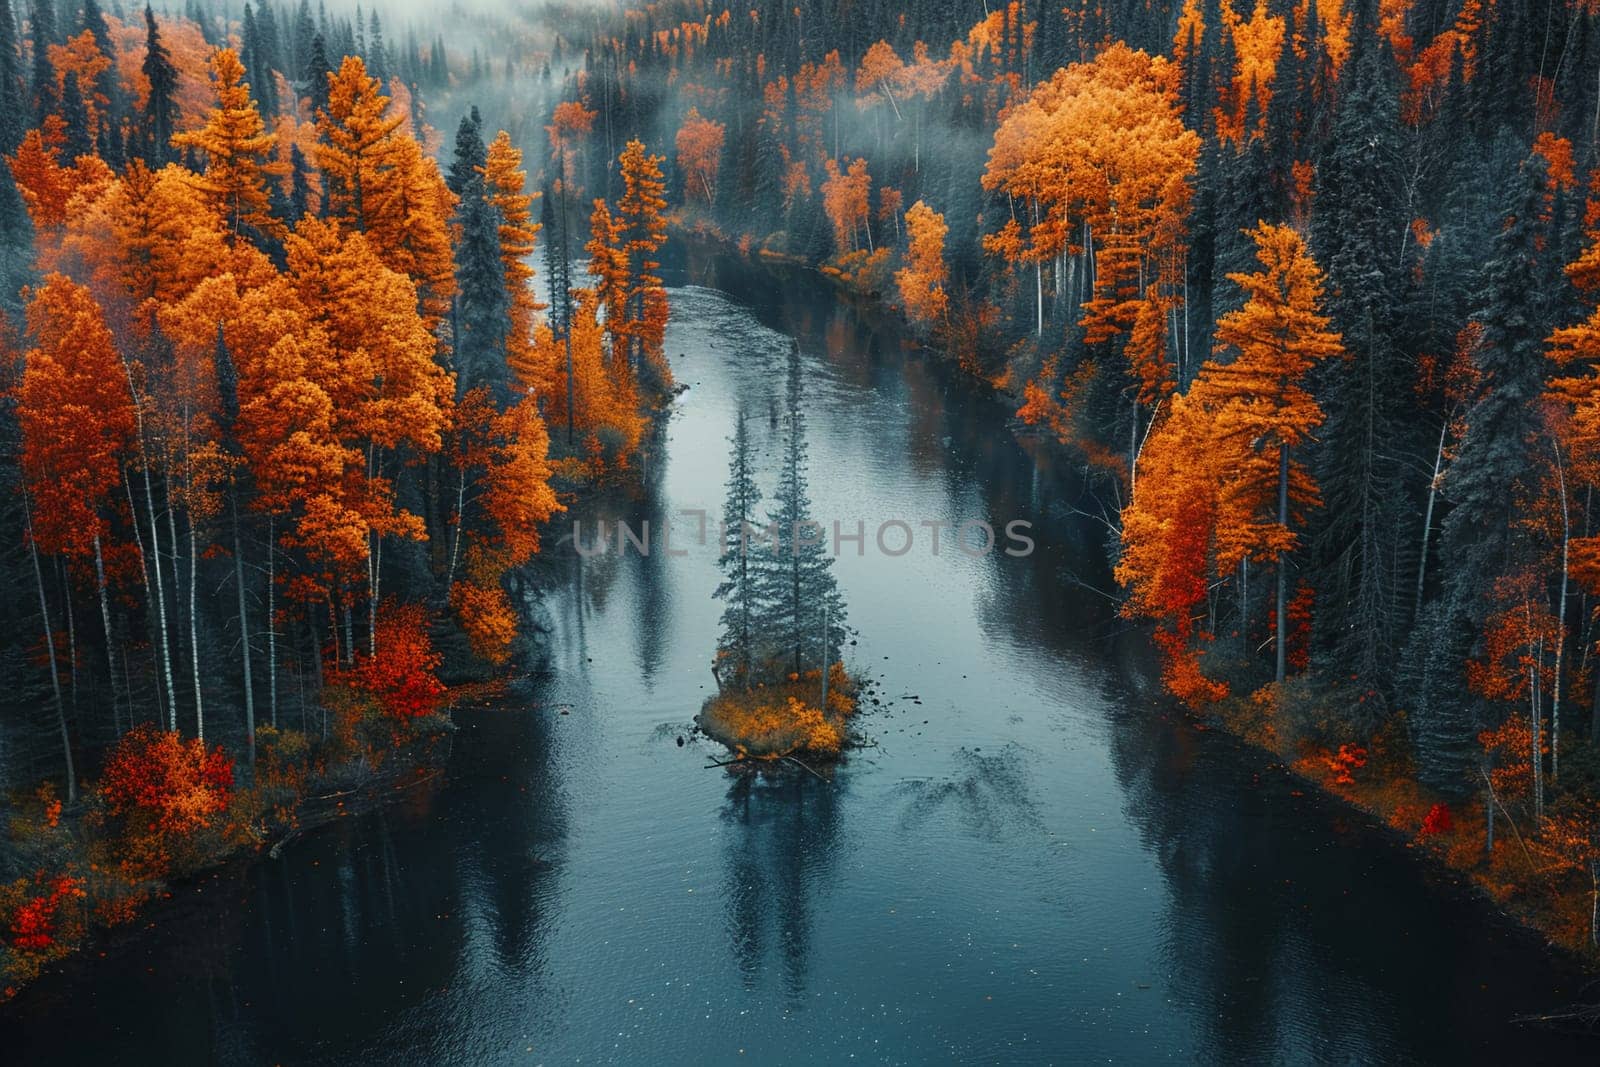 Winding river through a vibrant autumn forest, capturing natural beauty and seasonal change.